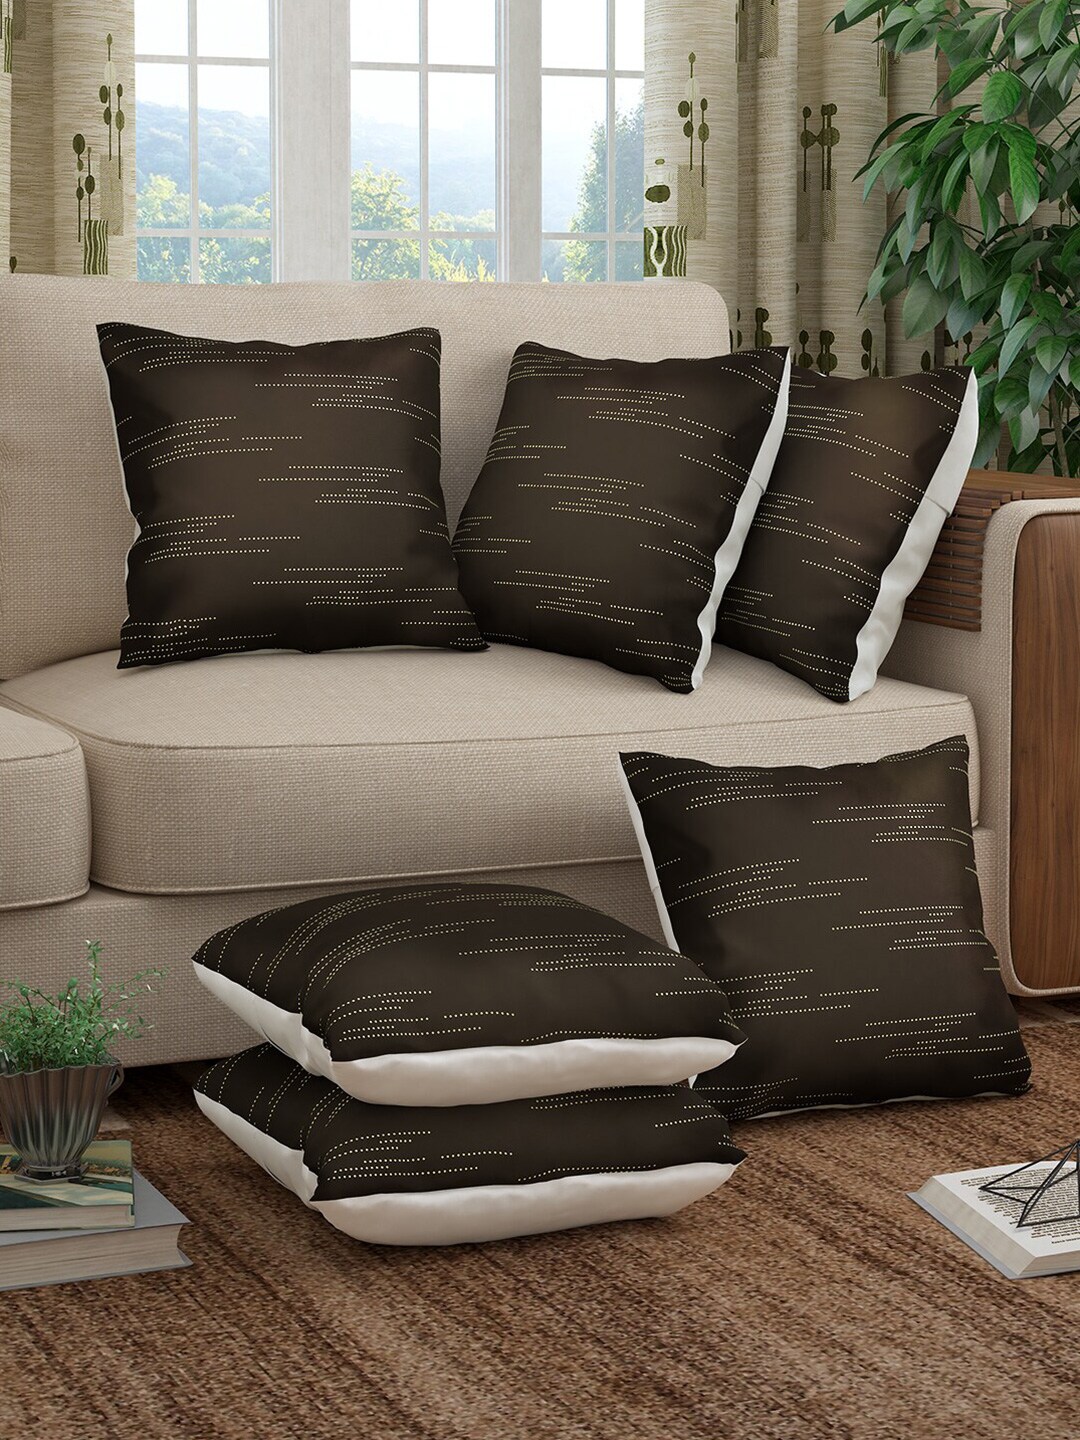 Story@home Brown & Gold-Toned Set of 6 Striped Square Cushion Covers Price in India